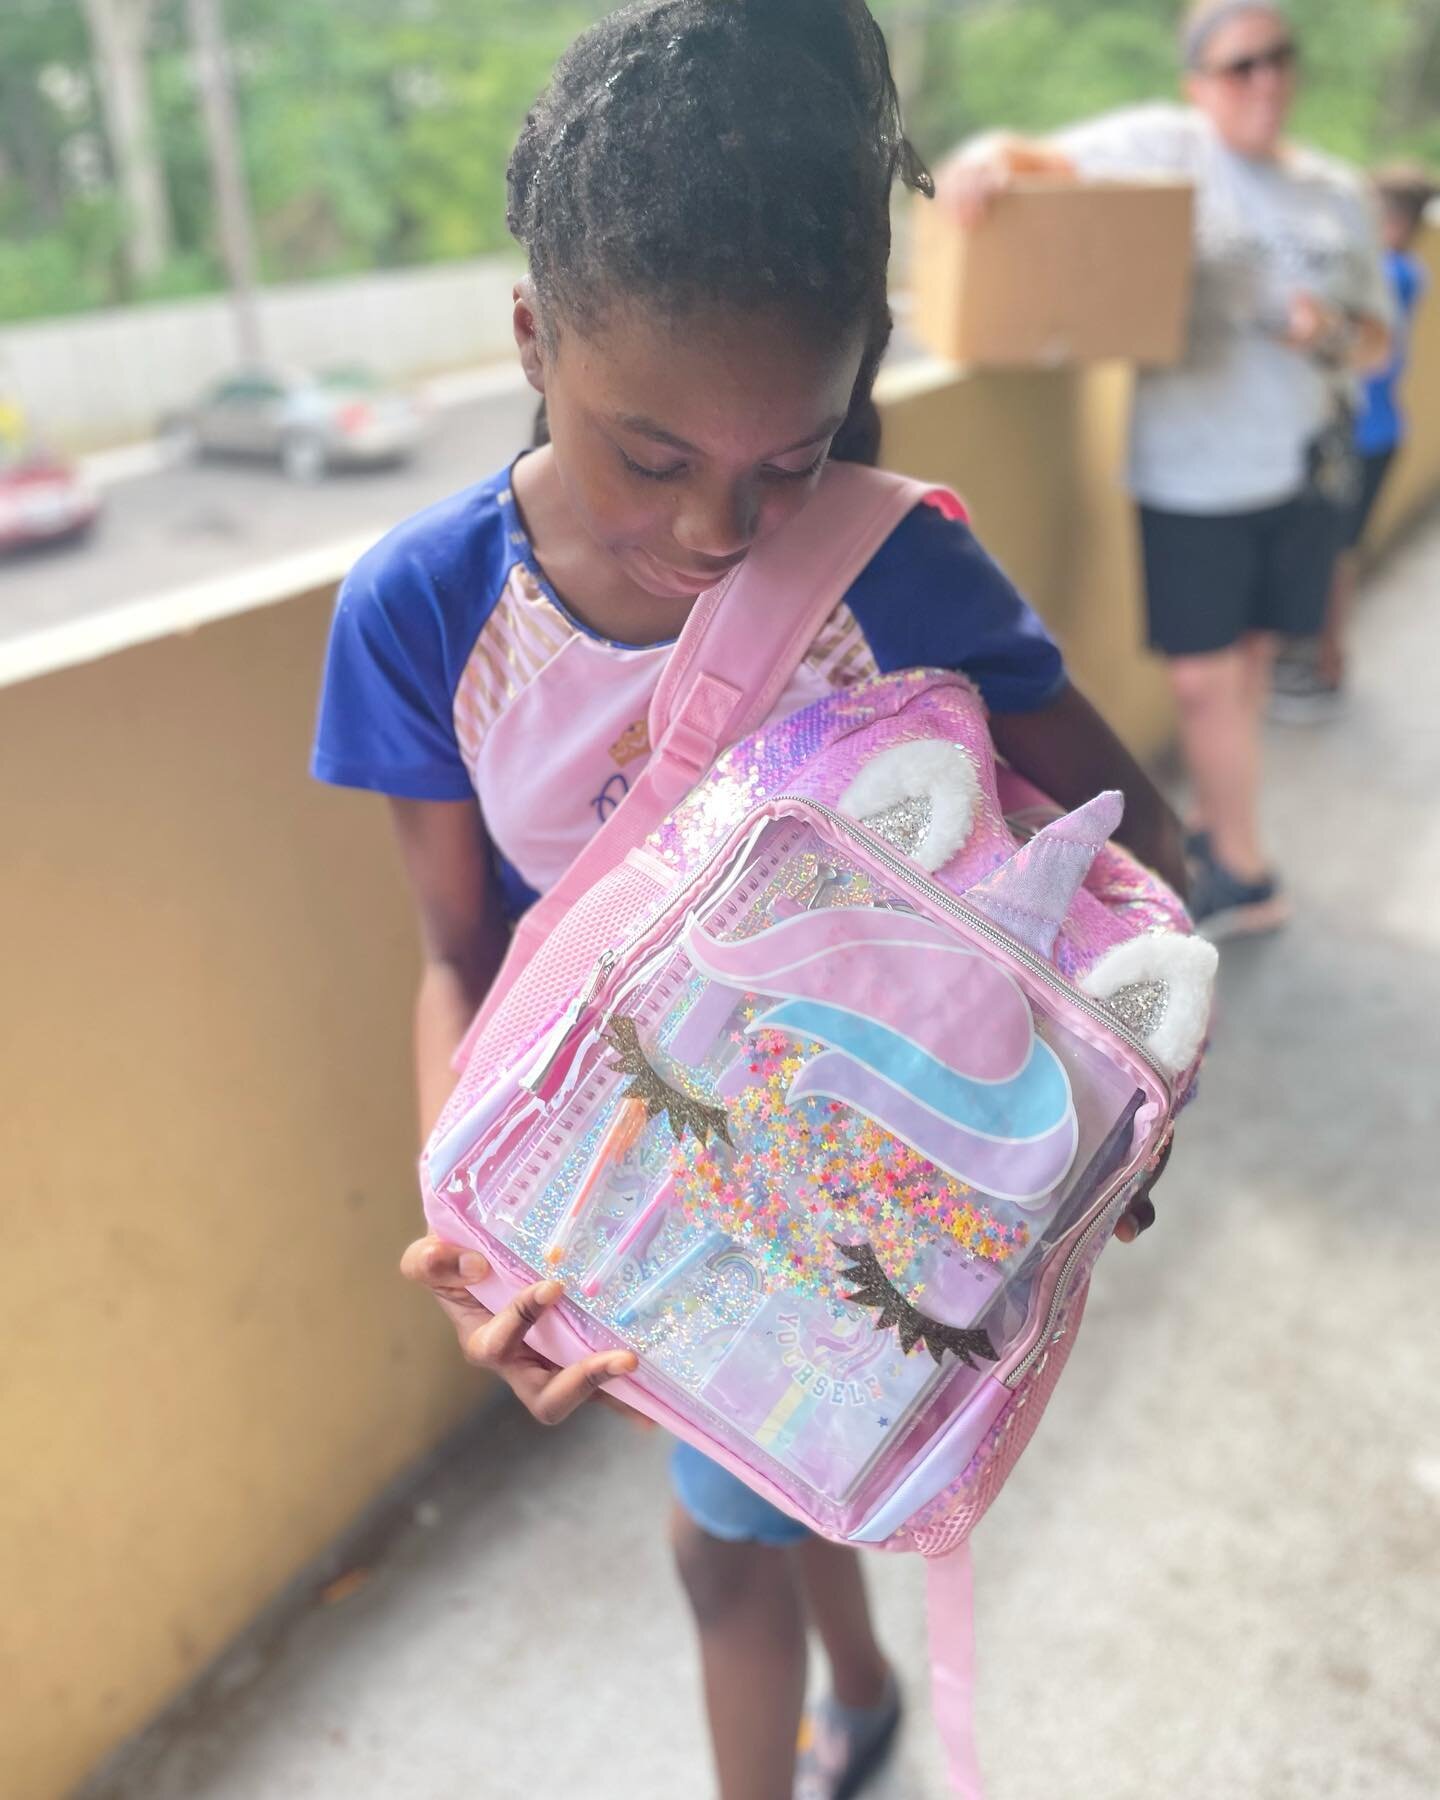 39 children in our unhoused community here in Wayne County are headed back to school this year with new book bags, supplies, outfits, and shoes, all because of Tommy&rsquo;s Foundation's amazing donors!! We want to say a HUGE thank you to everyone wh